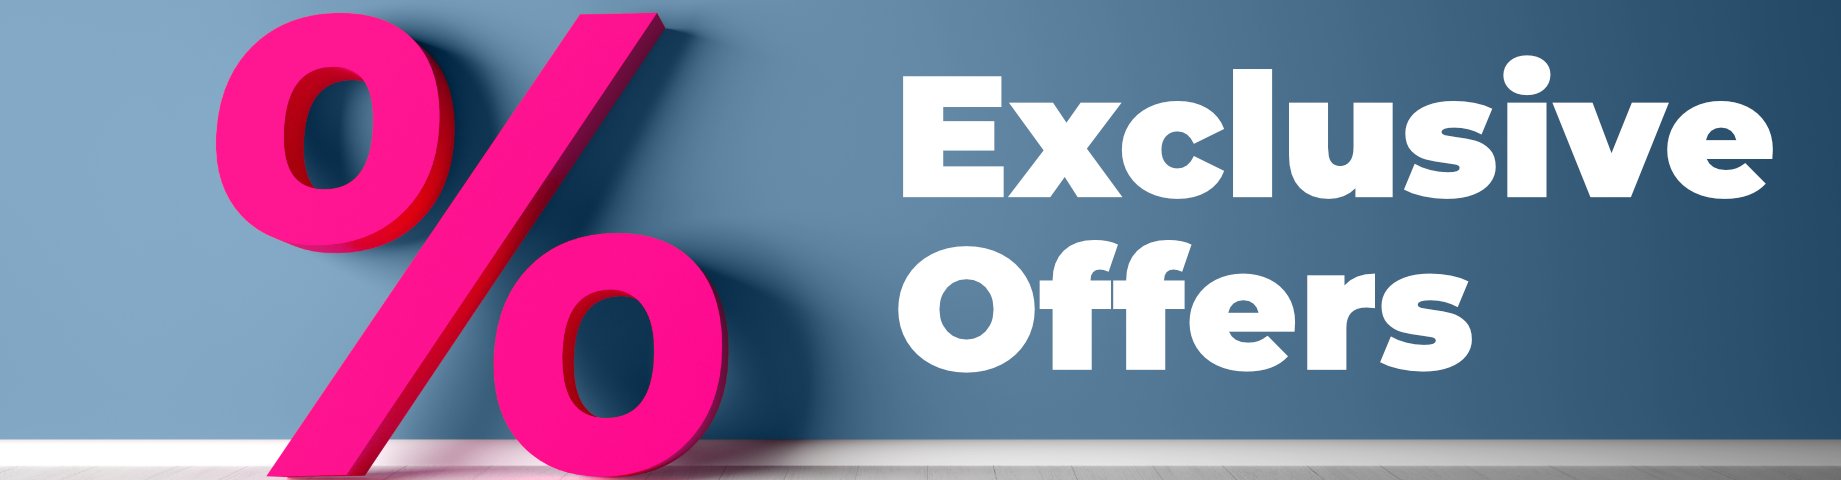 Exclusive Offers - Up to 70% Off on Selected Items